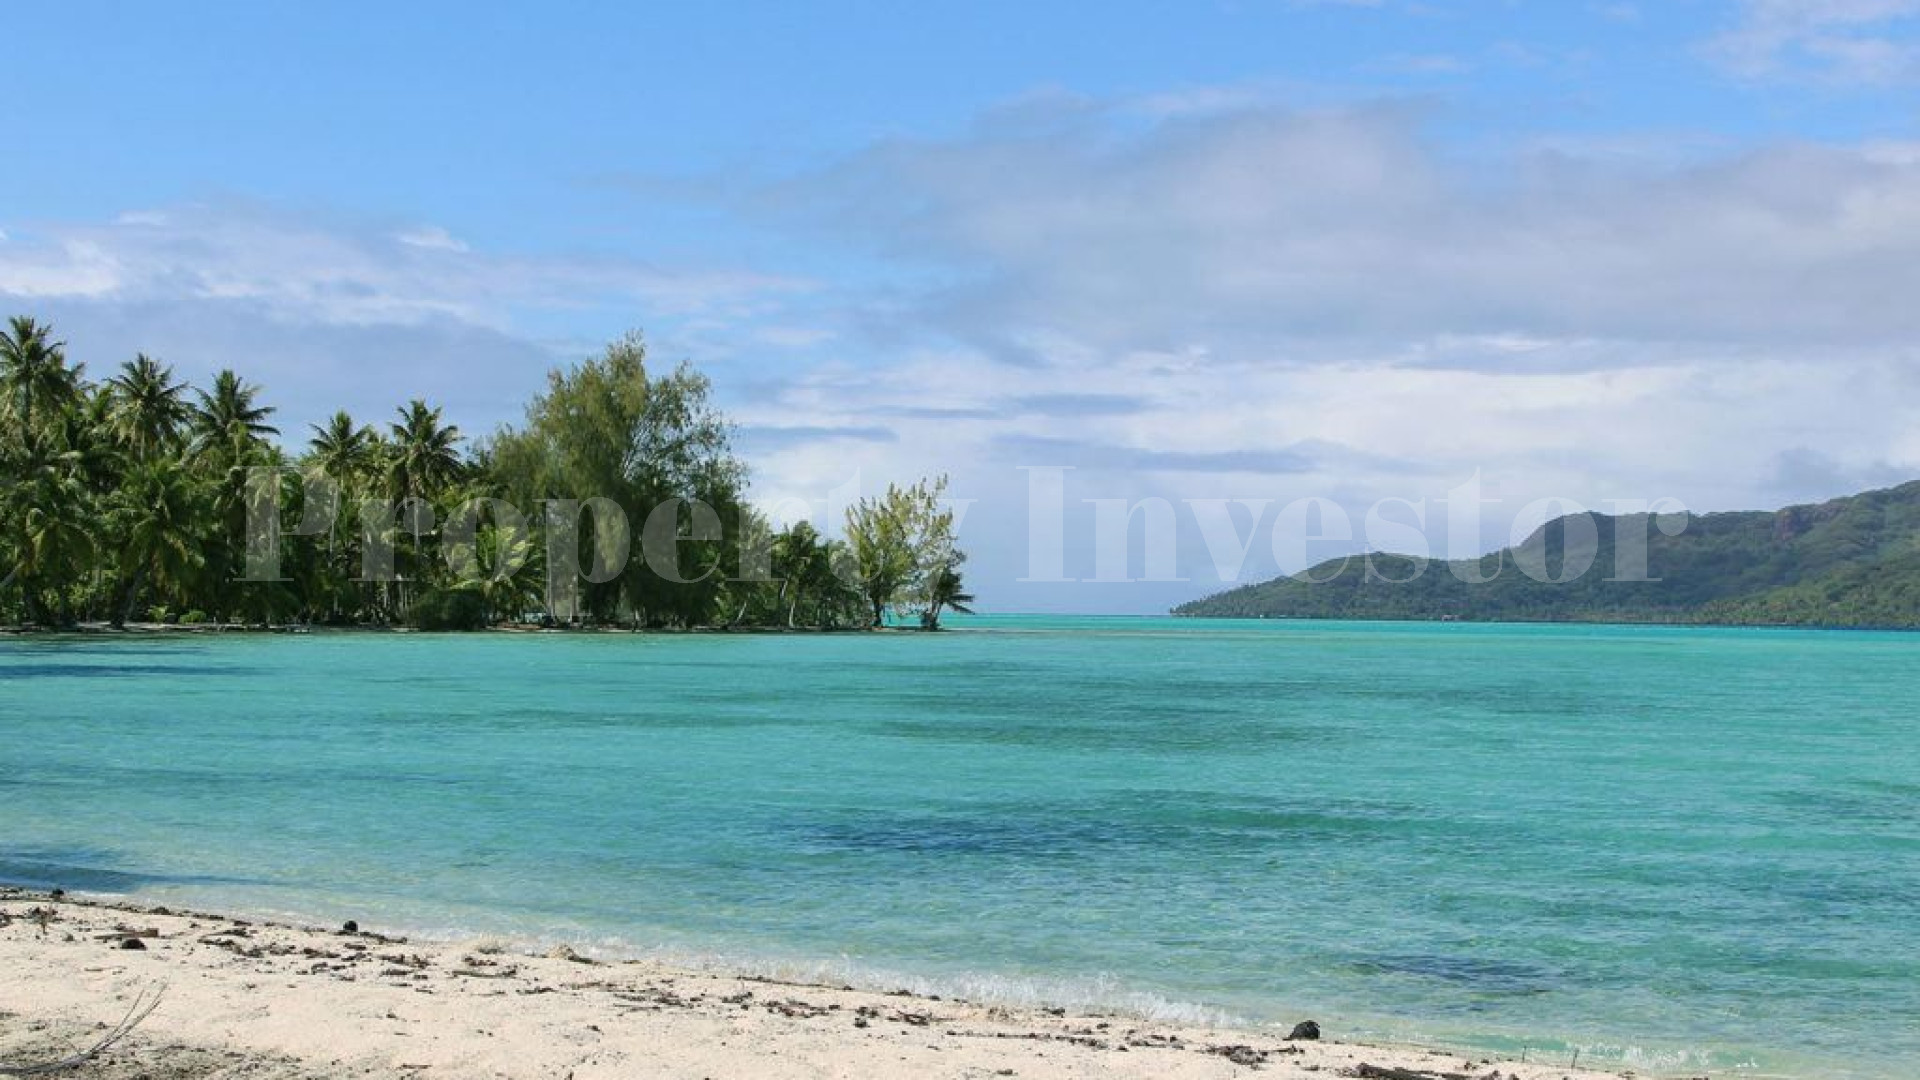 Magnificent 7.12 Hectare Private Virgin Island for Sale in French Polynesia